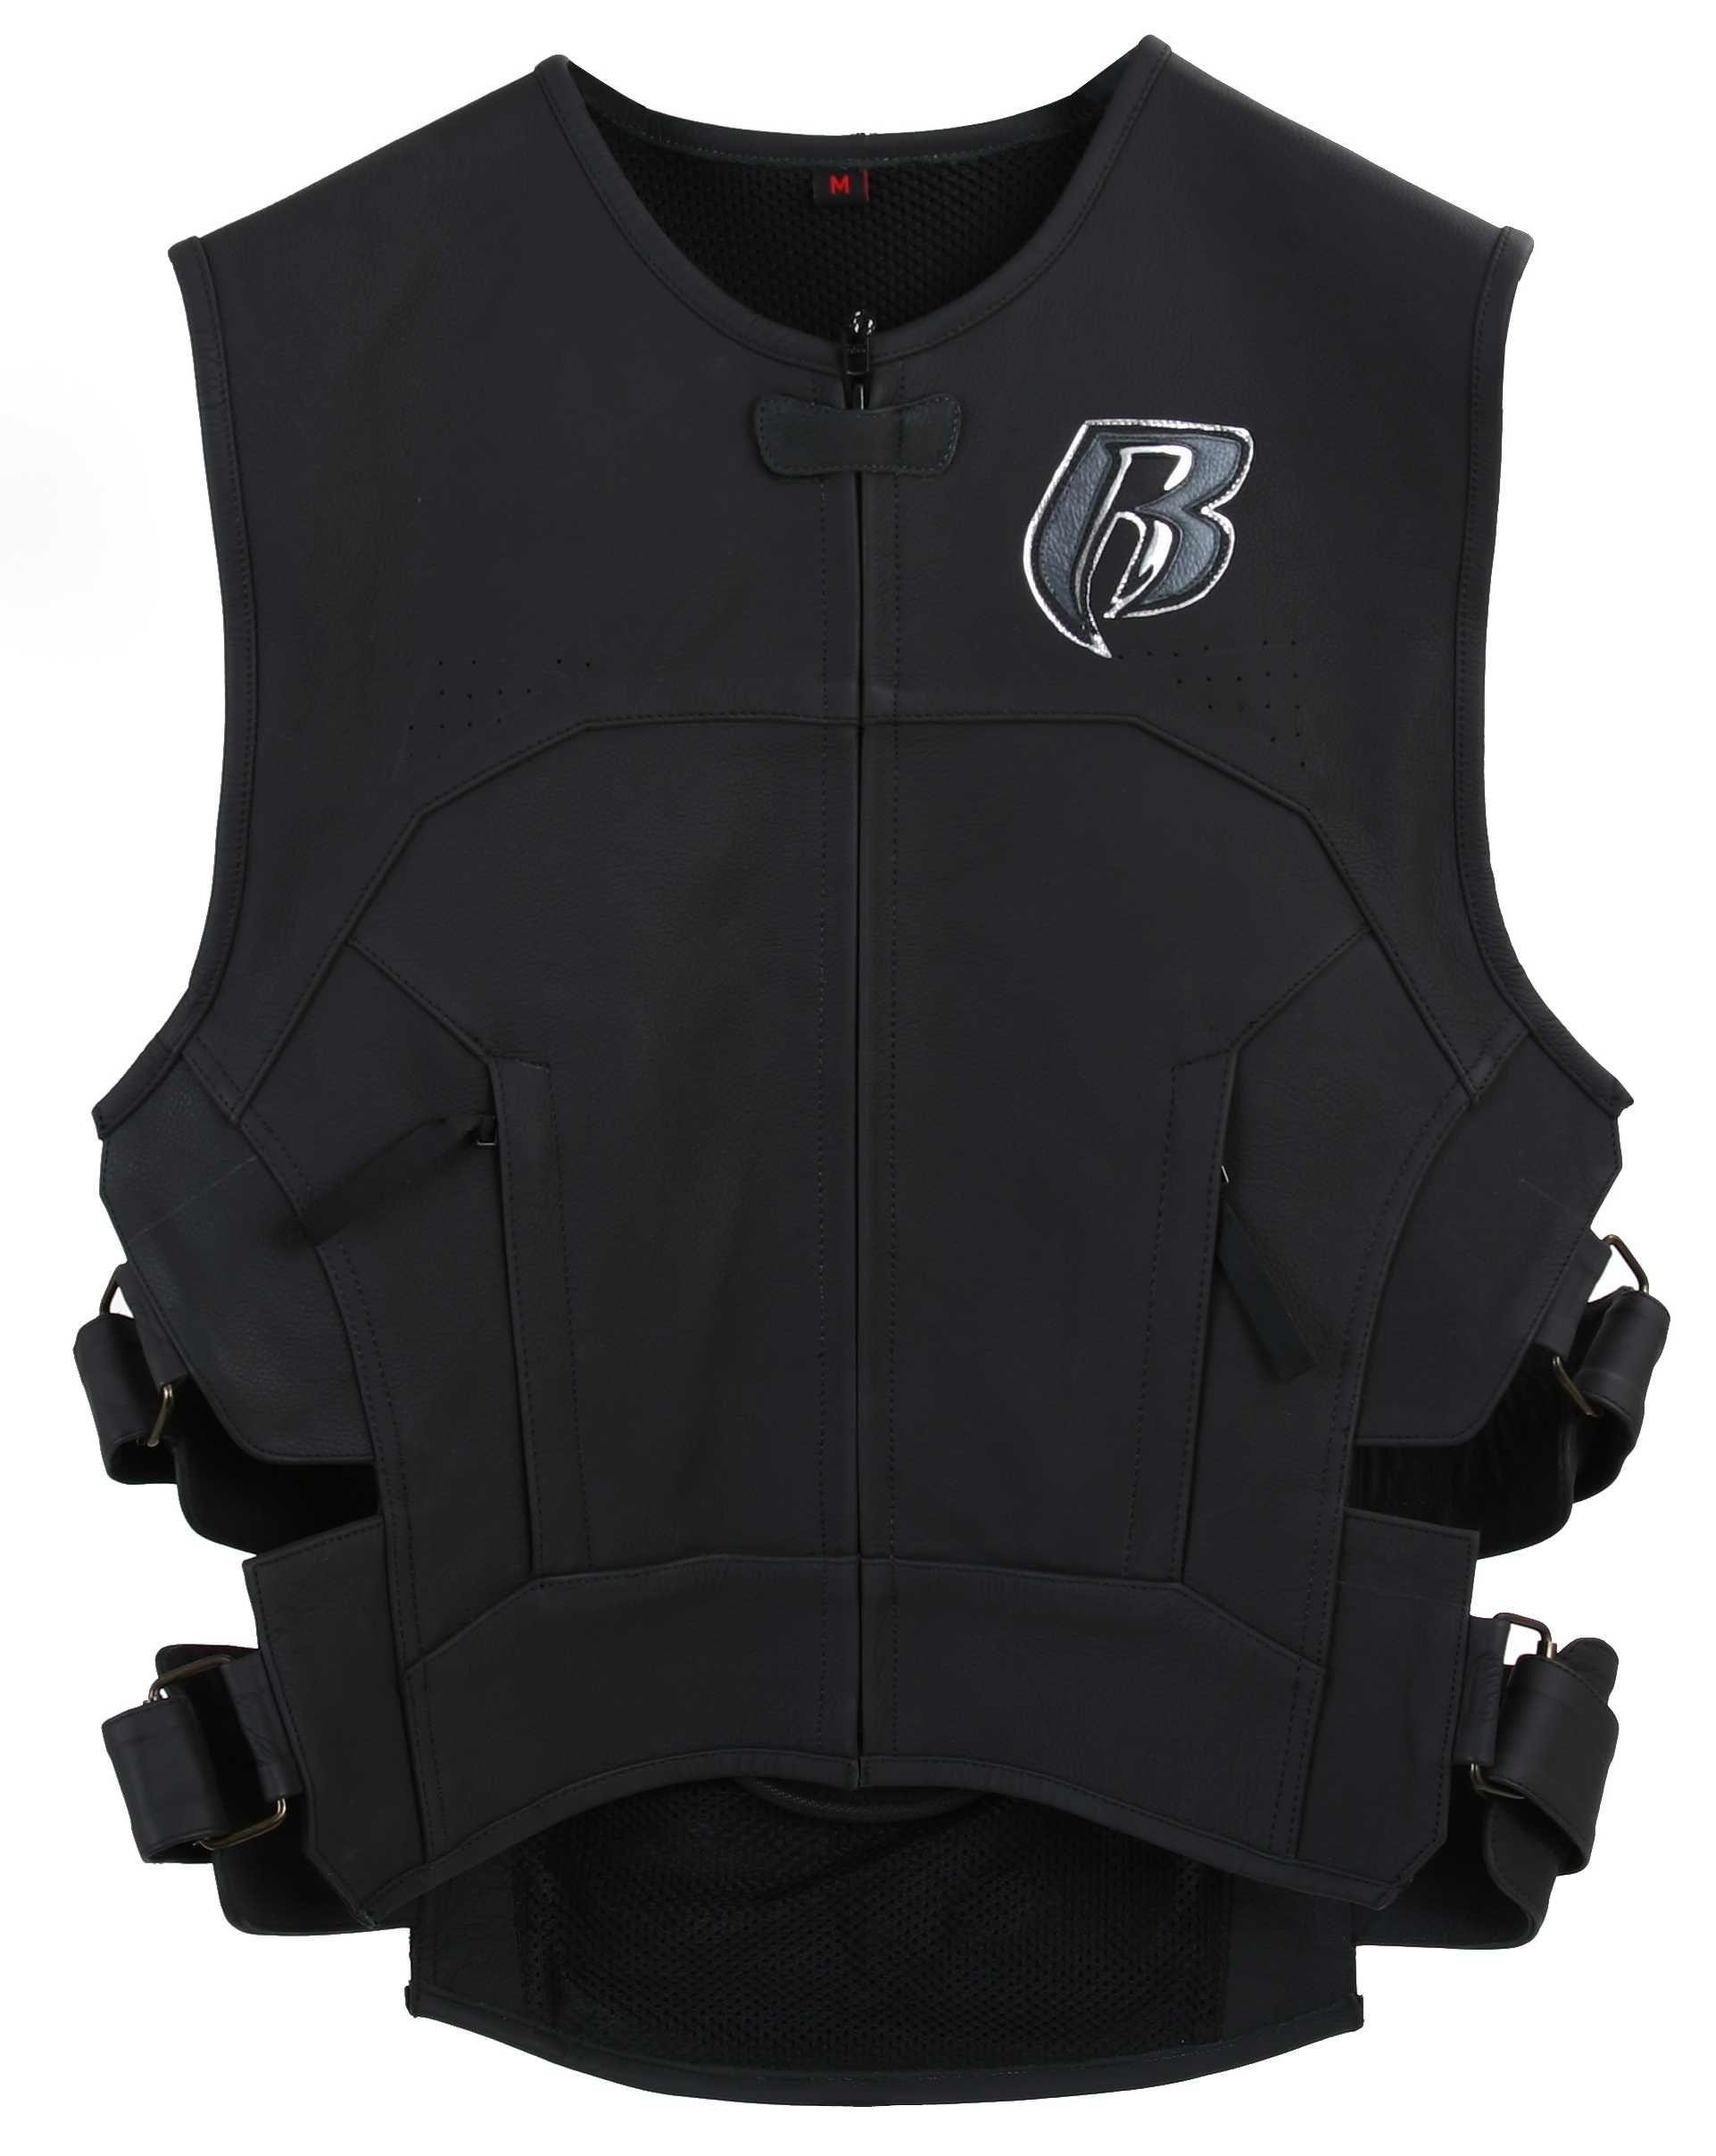 Ruff ryders vest for sale bidvest forex or tambo airport